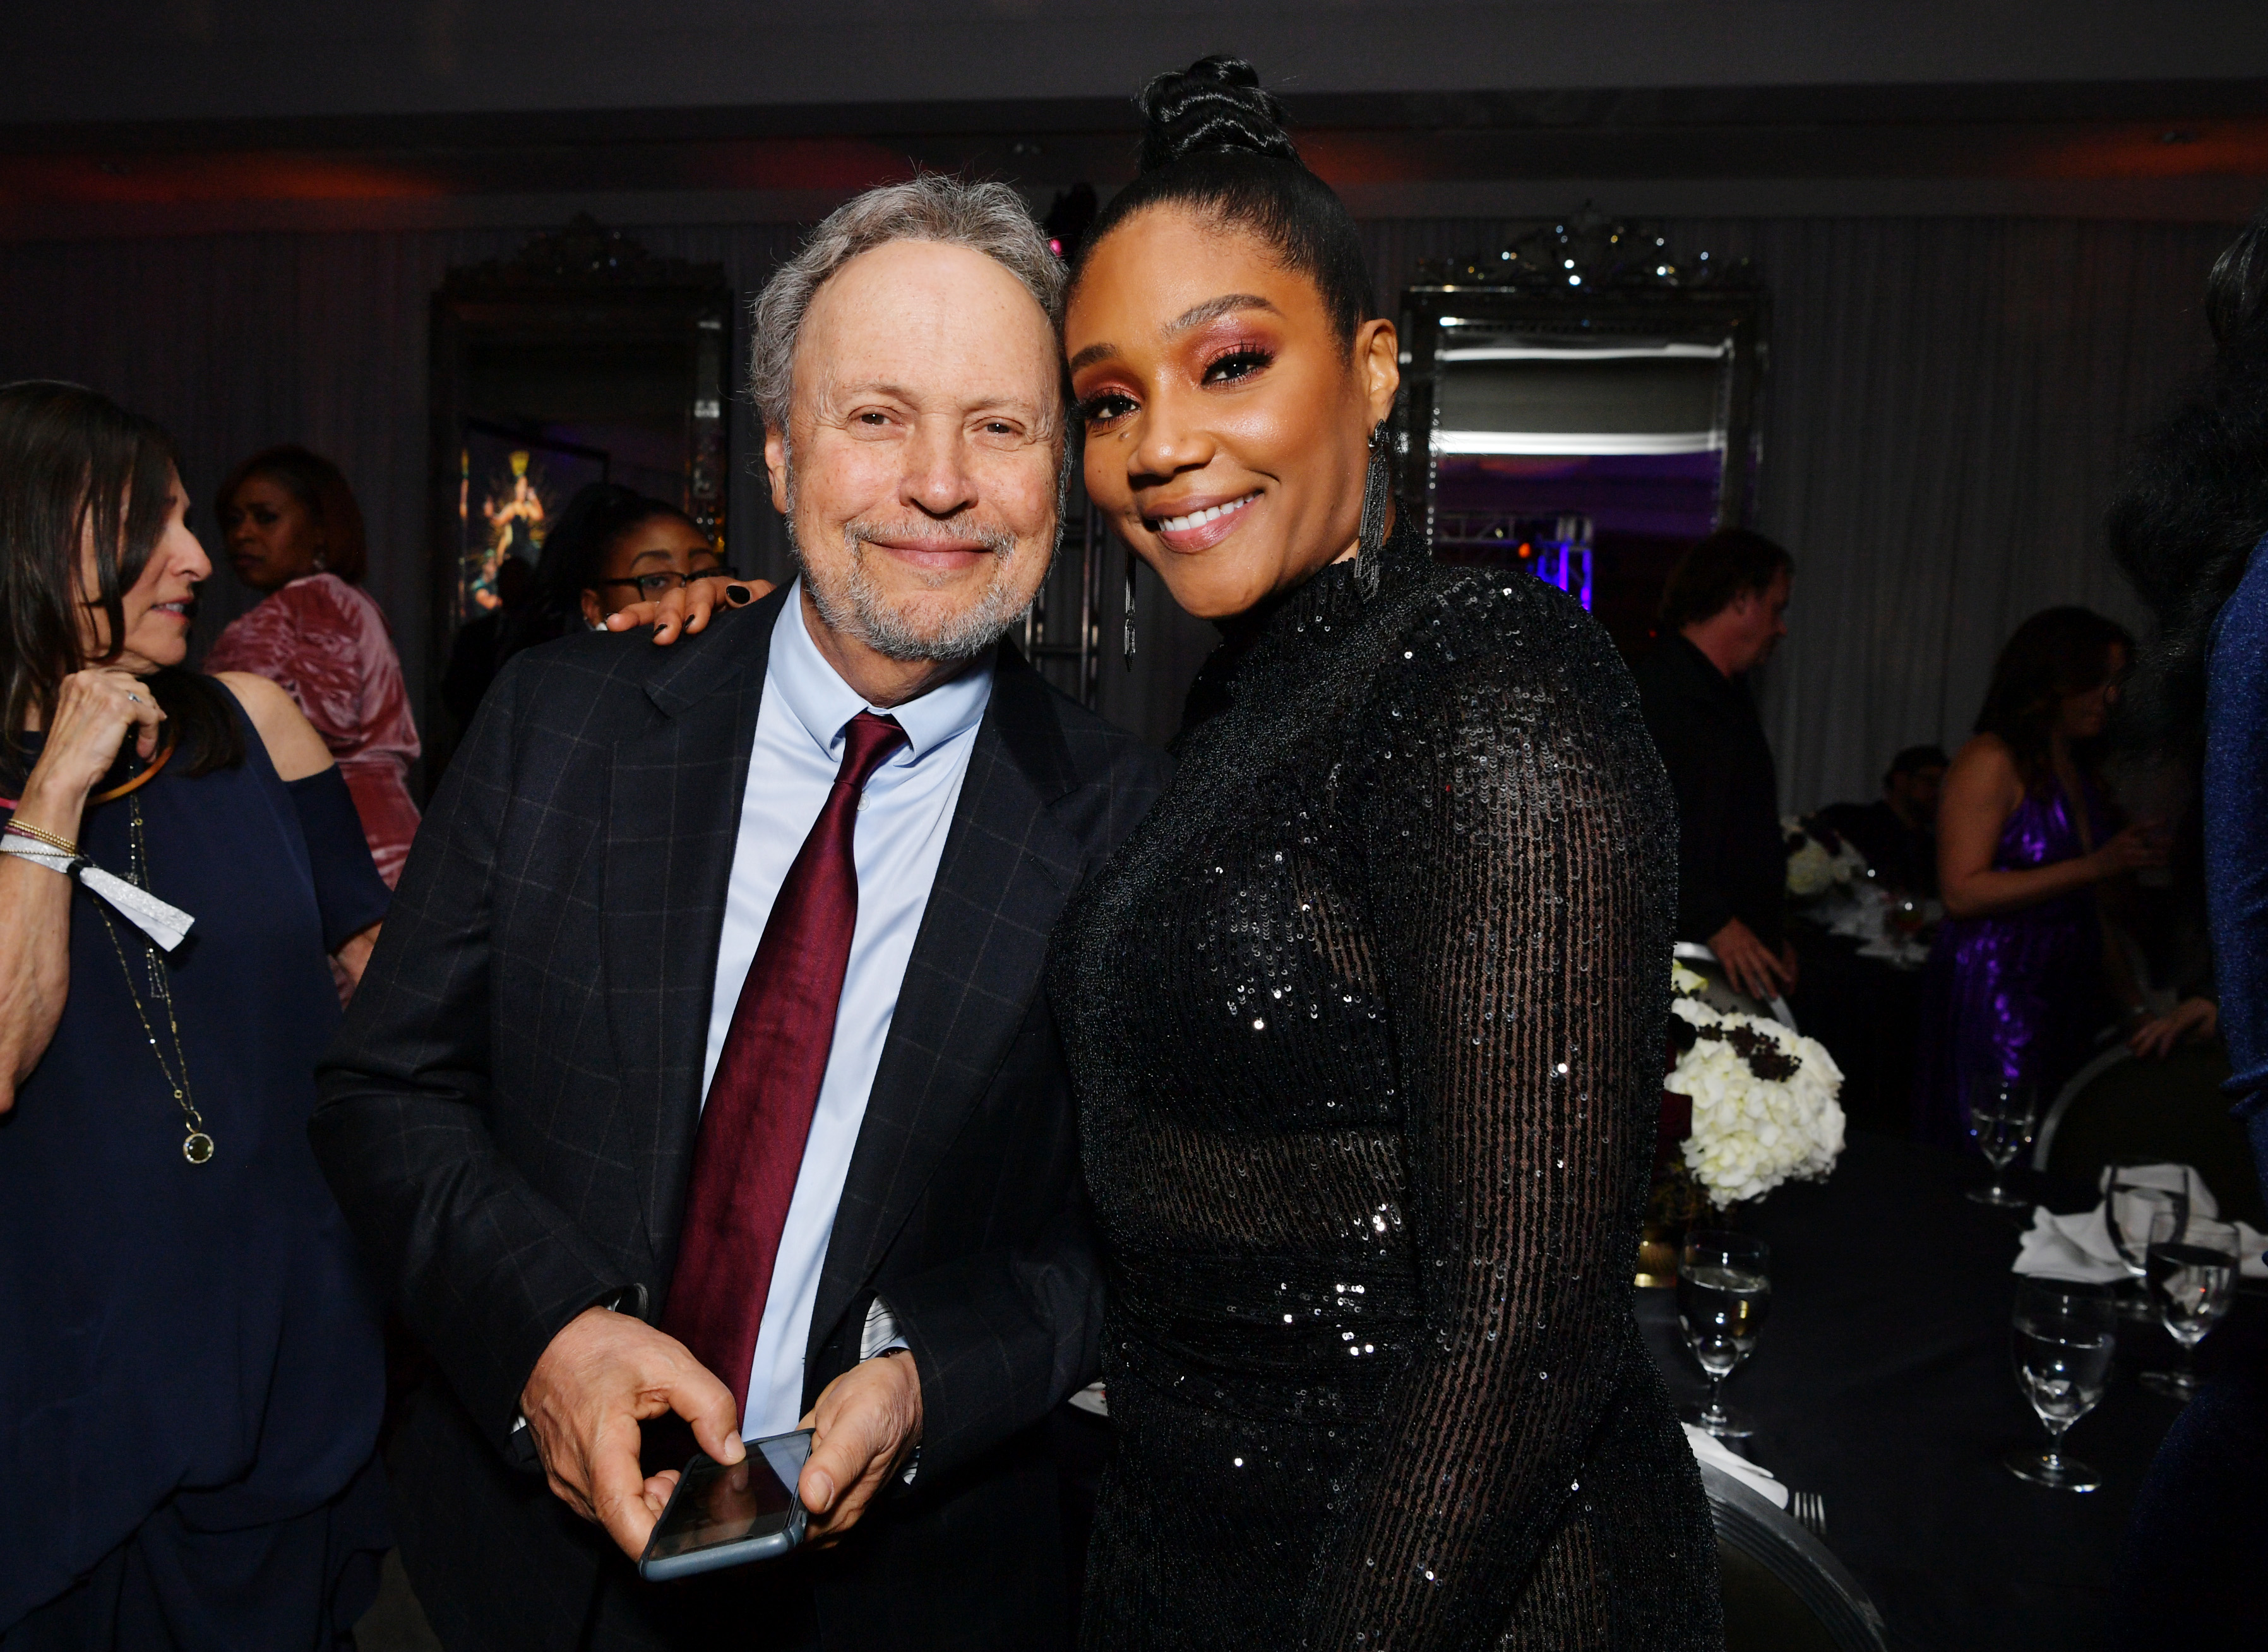 Billy Crystal and Tiffany Haddish at "Tiffany Haddish: Black Mitzvah" at SLS Hotel on December 3, 2019, in Beverly Hills, California | Source: Getty Images